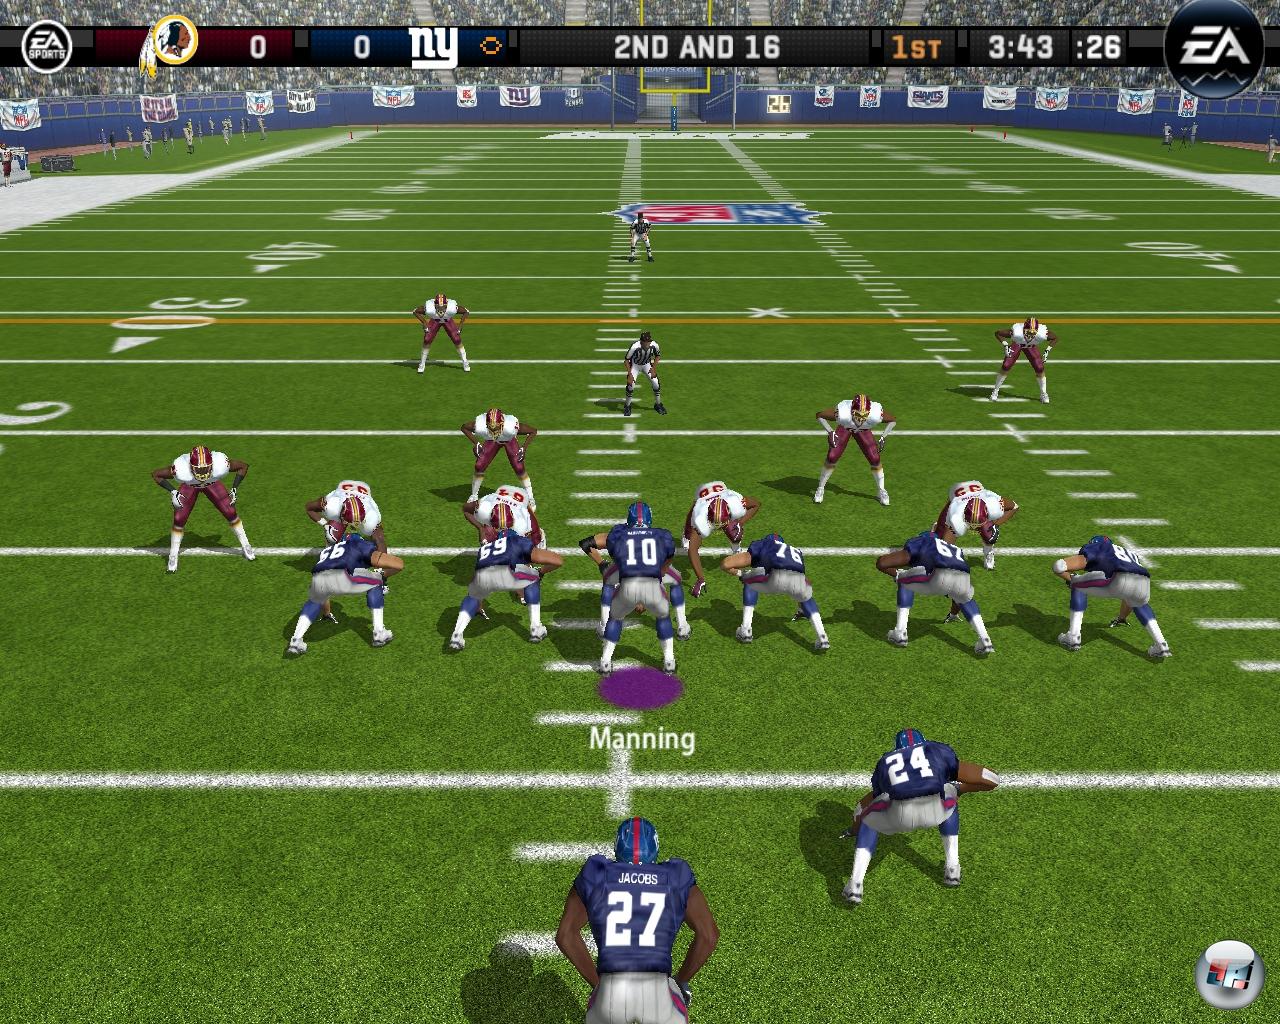 download madden nfl 08 pc free full version